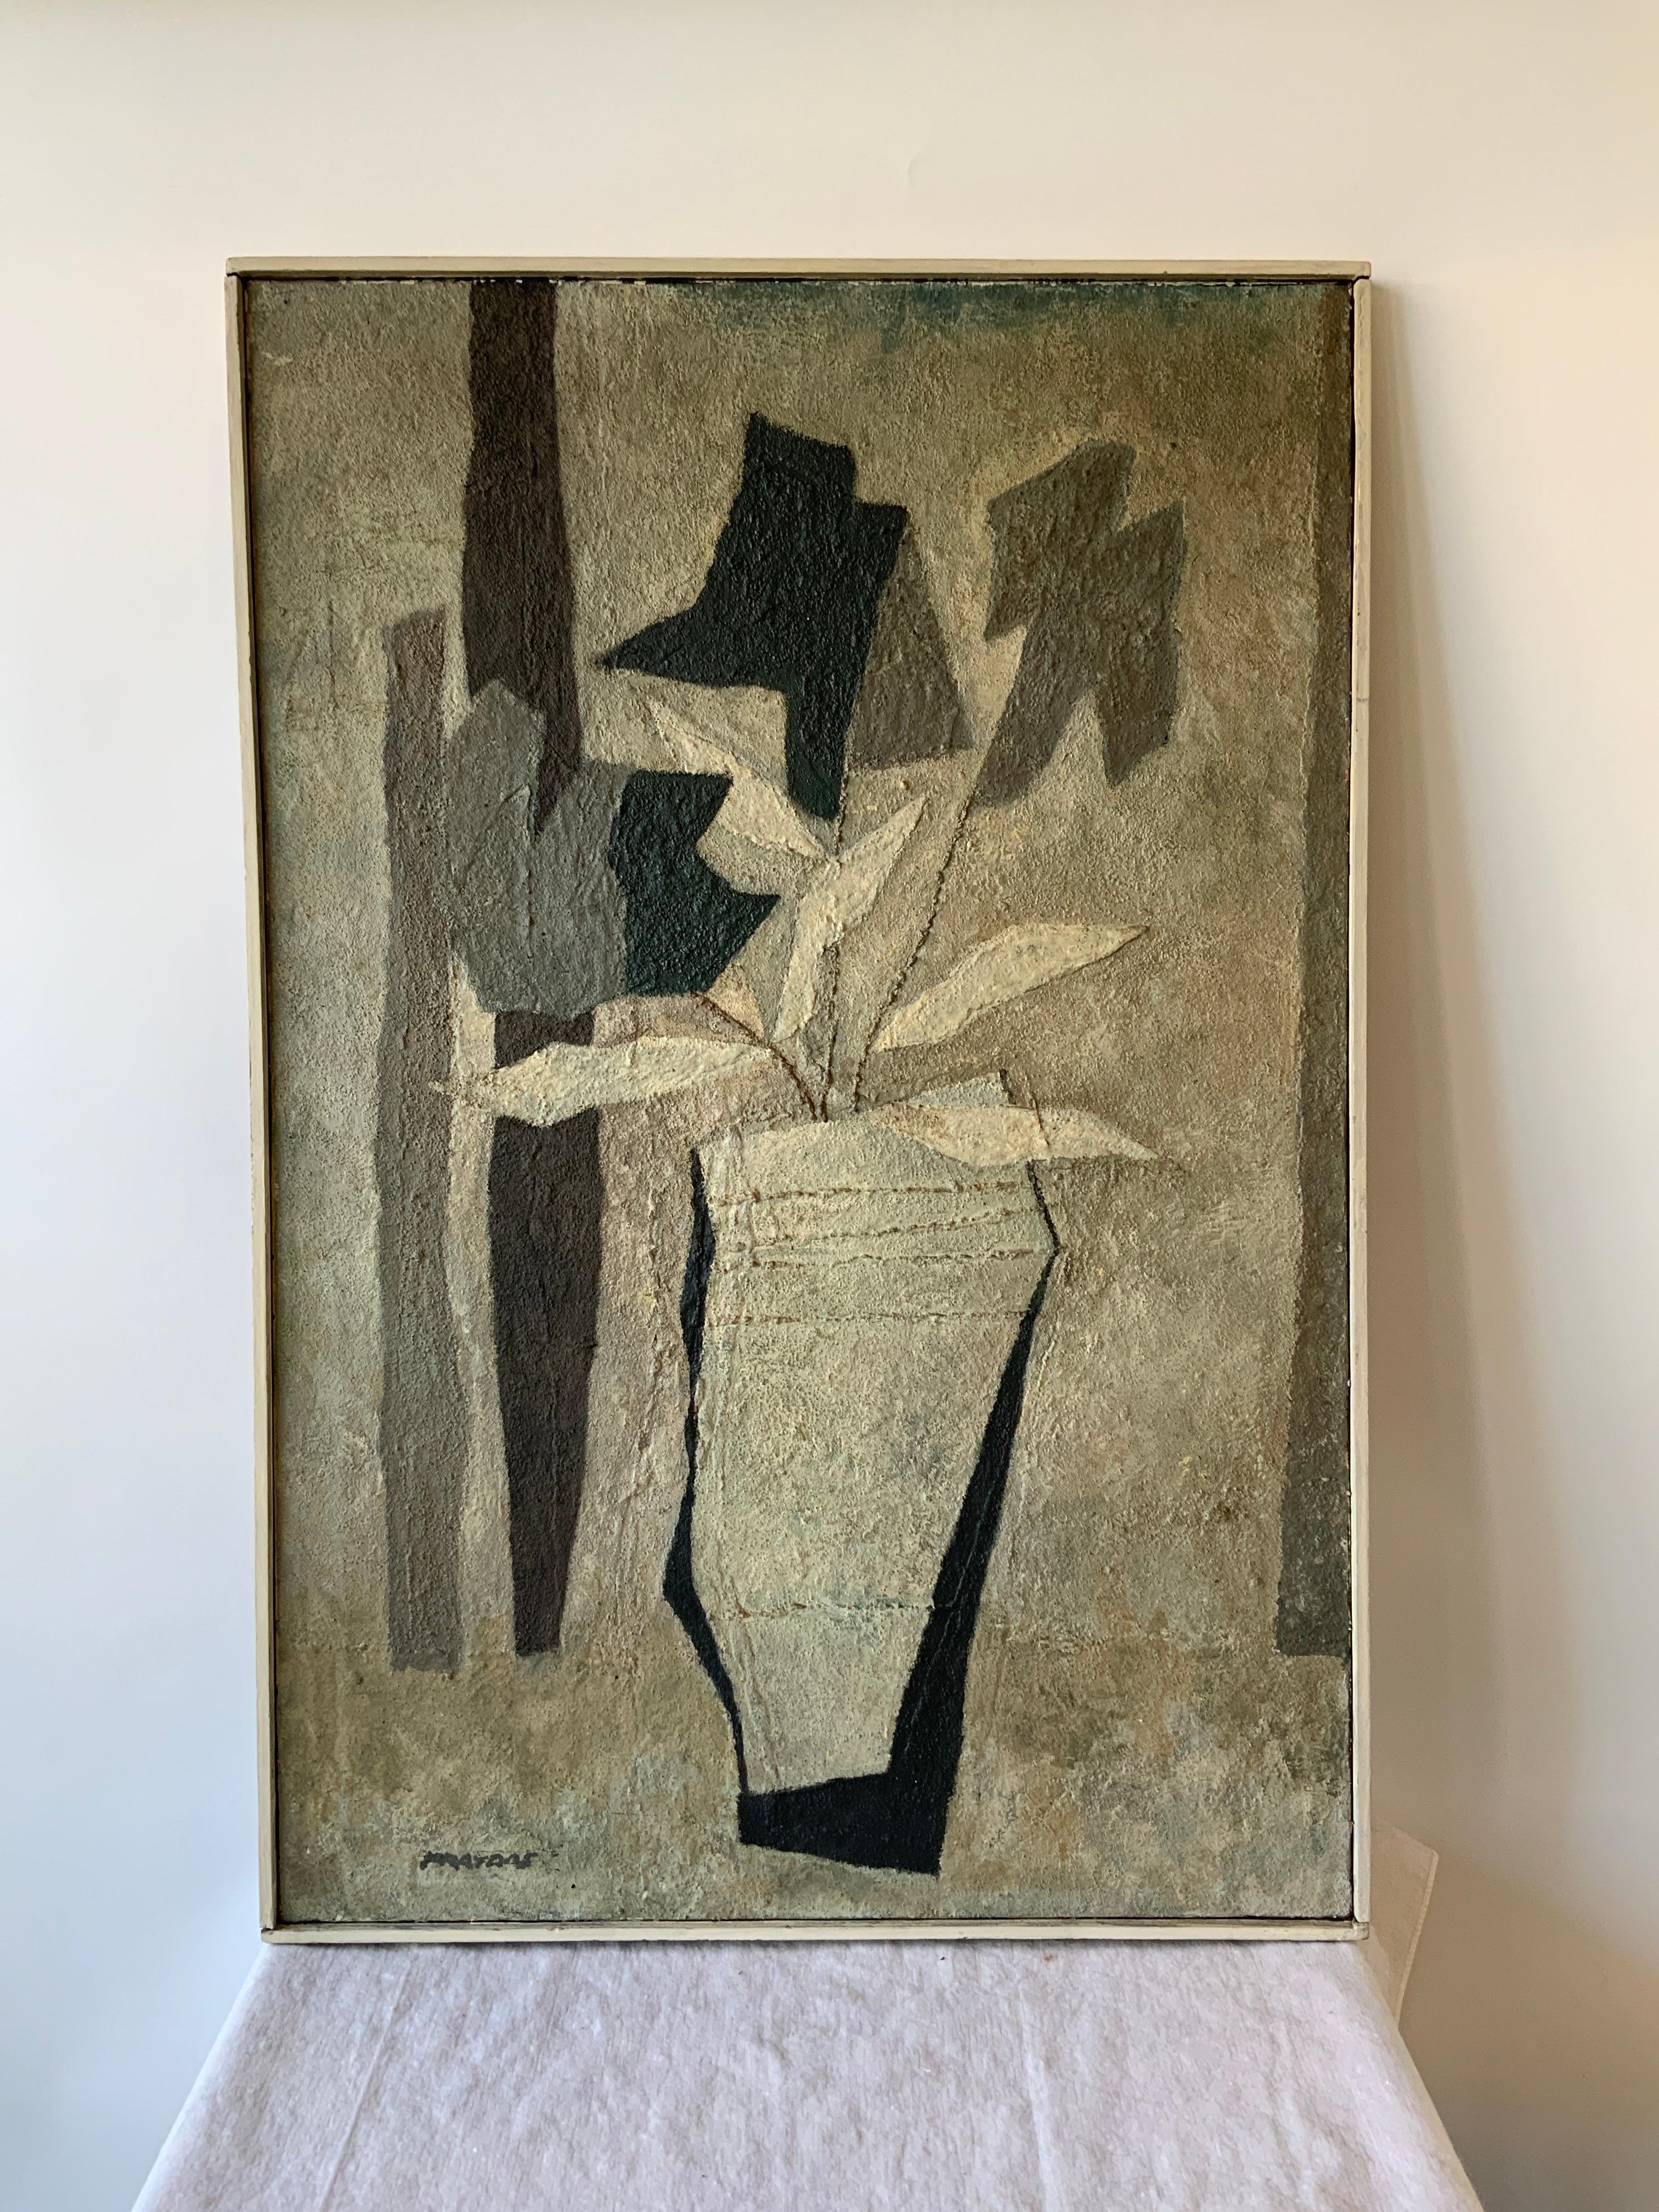 1950s textured acrylic painting on canvas of flowers in a vase. Signed Fraydas.